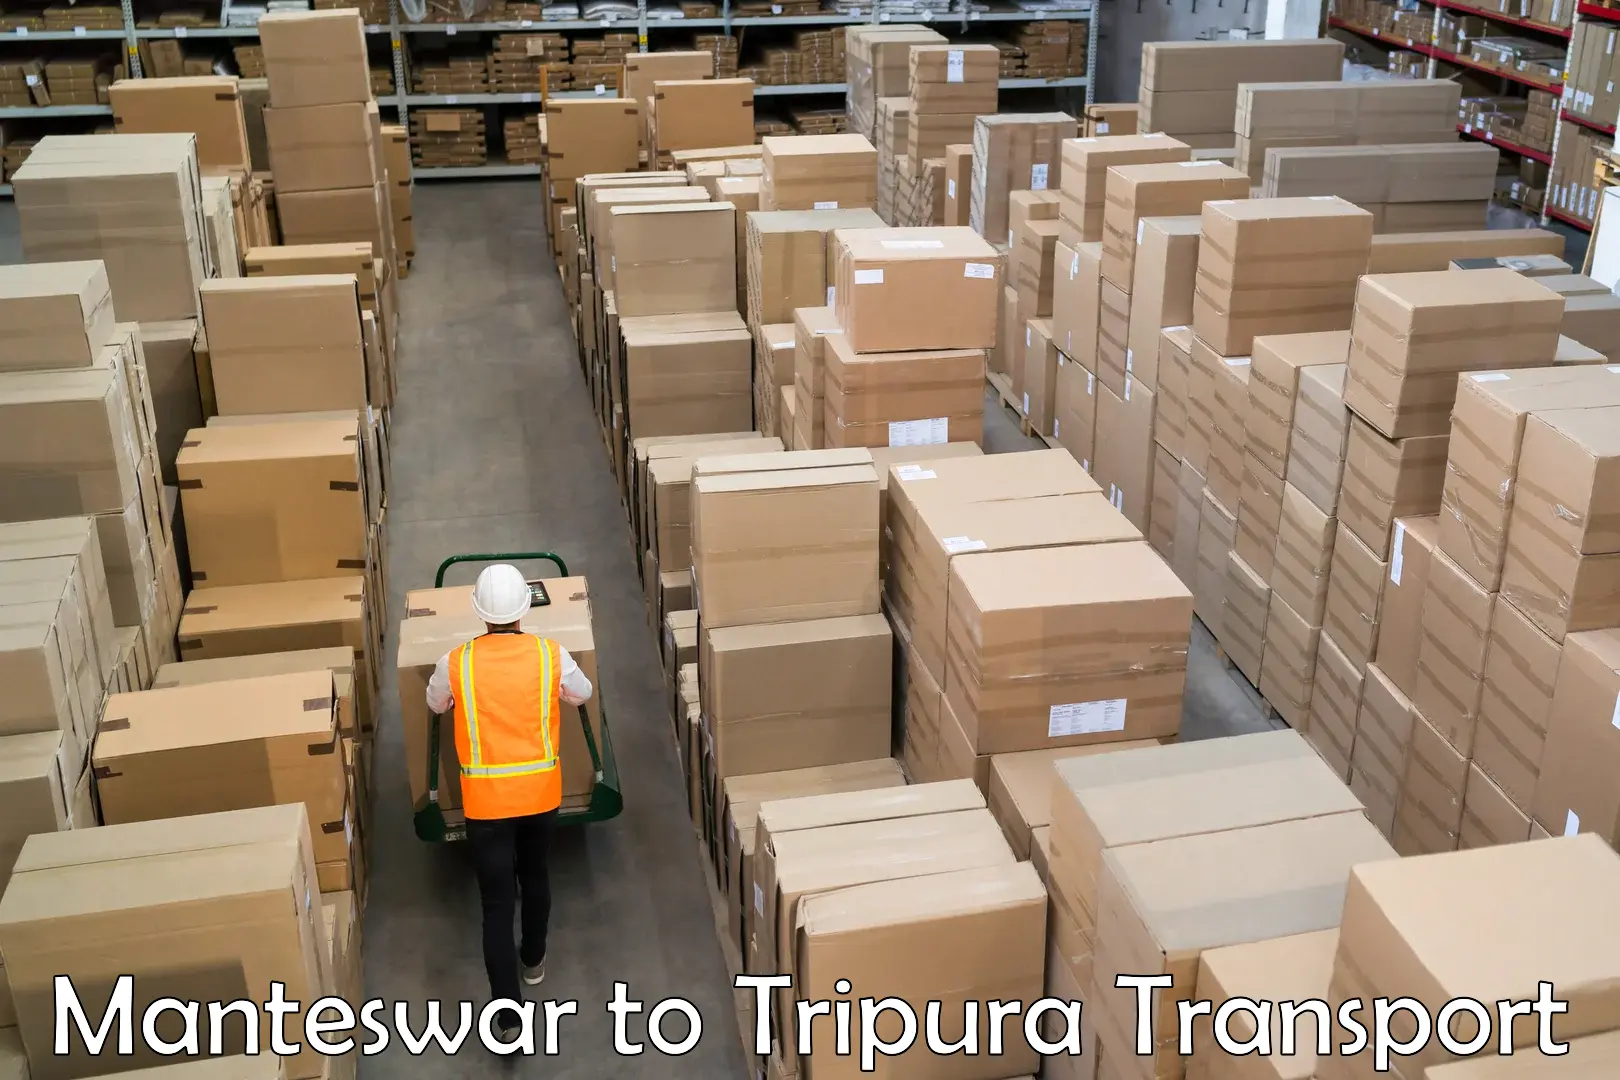 Shipping services Manteswar to Udaipur Tripura